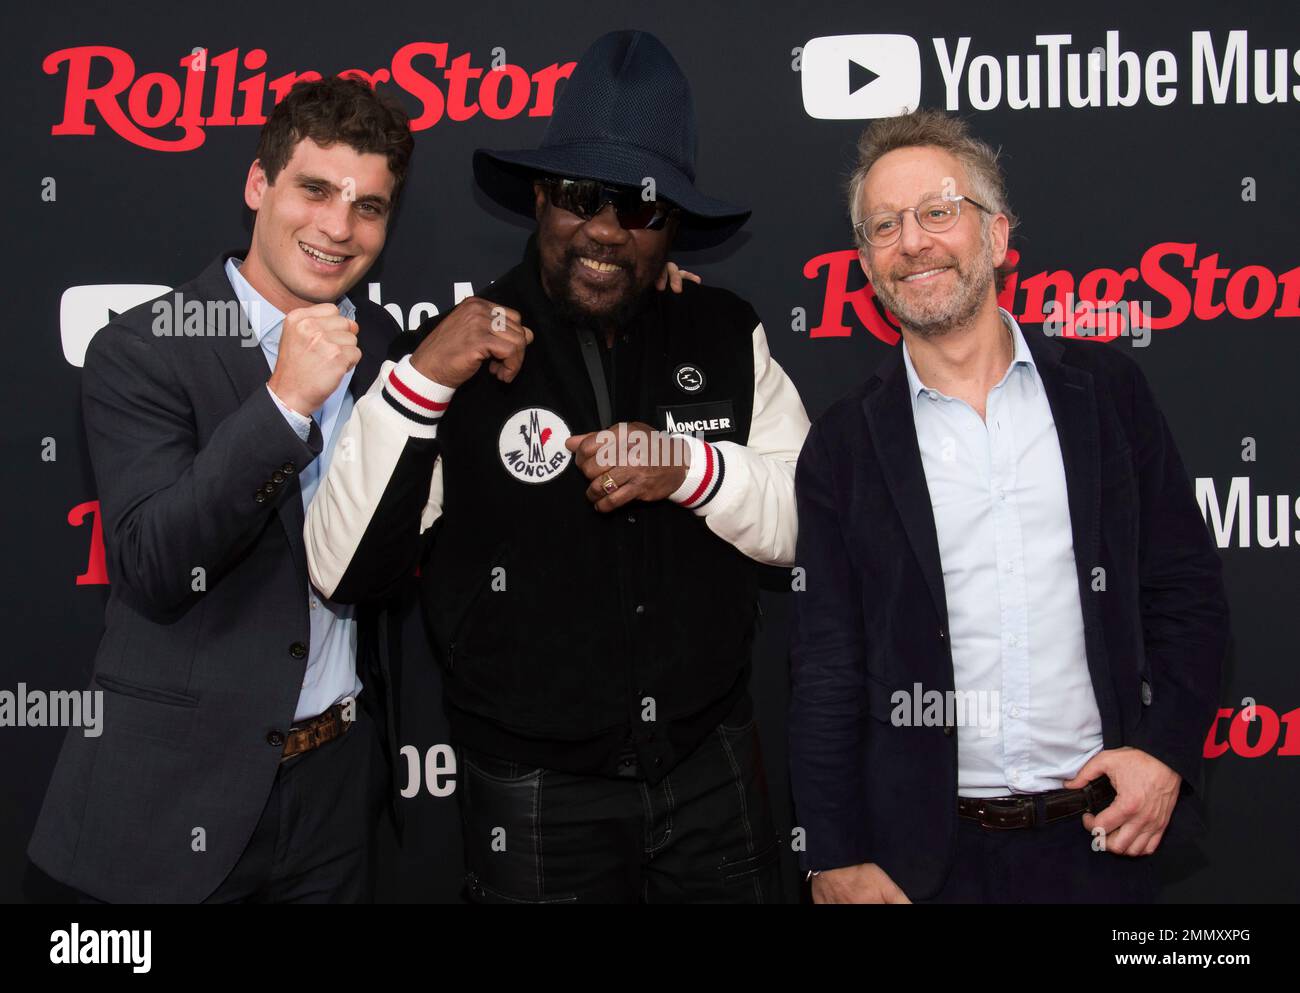 Gus Wenner, left, Toots Hibbert and Jason Fine attend a Rolling Stone magazine relaunch event presented by YouTube Music on Thursday, July 26, 2018, in New York. (Photo by Charles Sykes/Invision/AP) Stock Photo